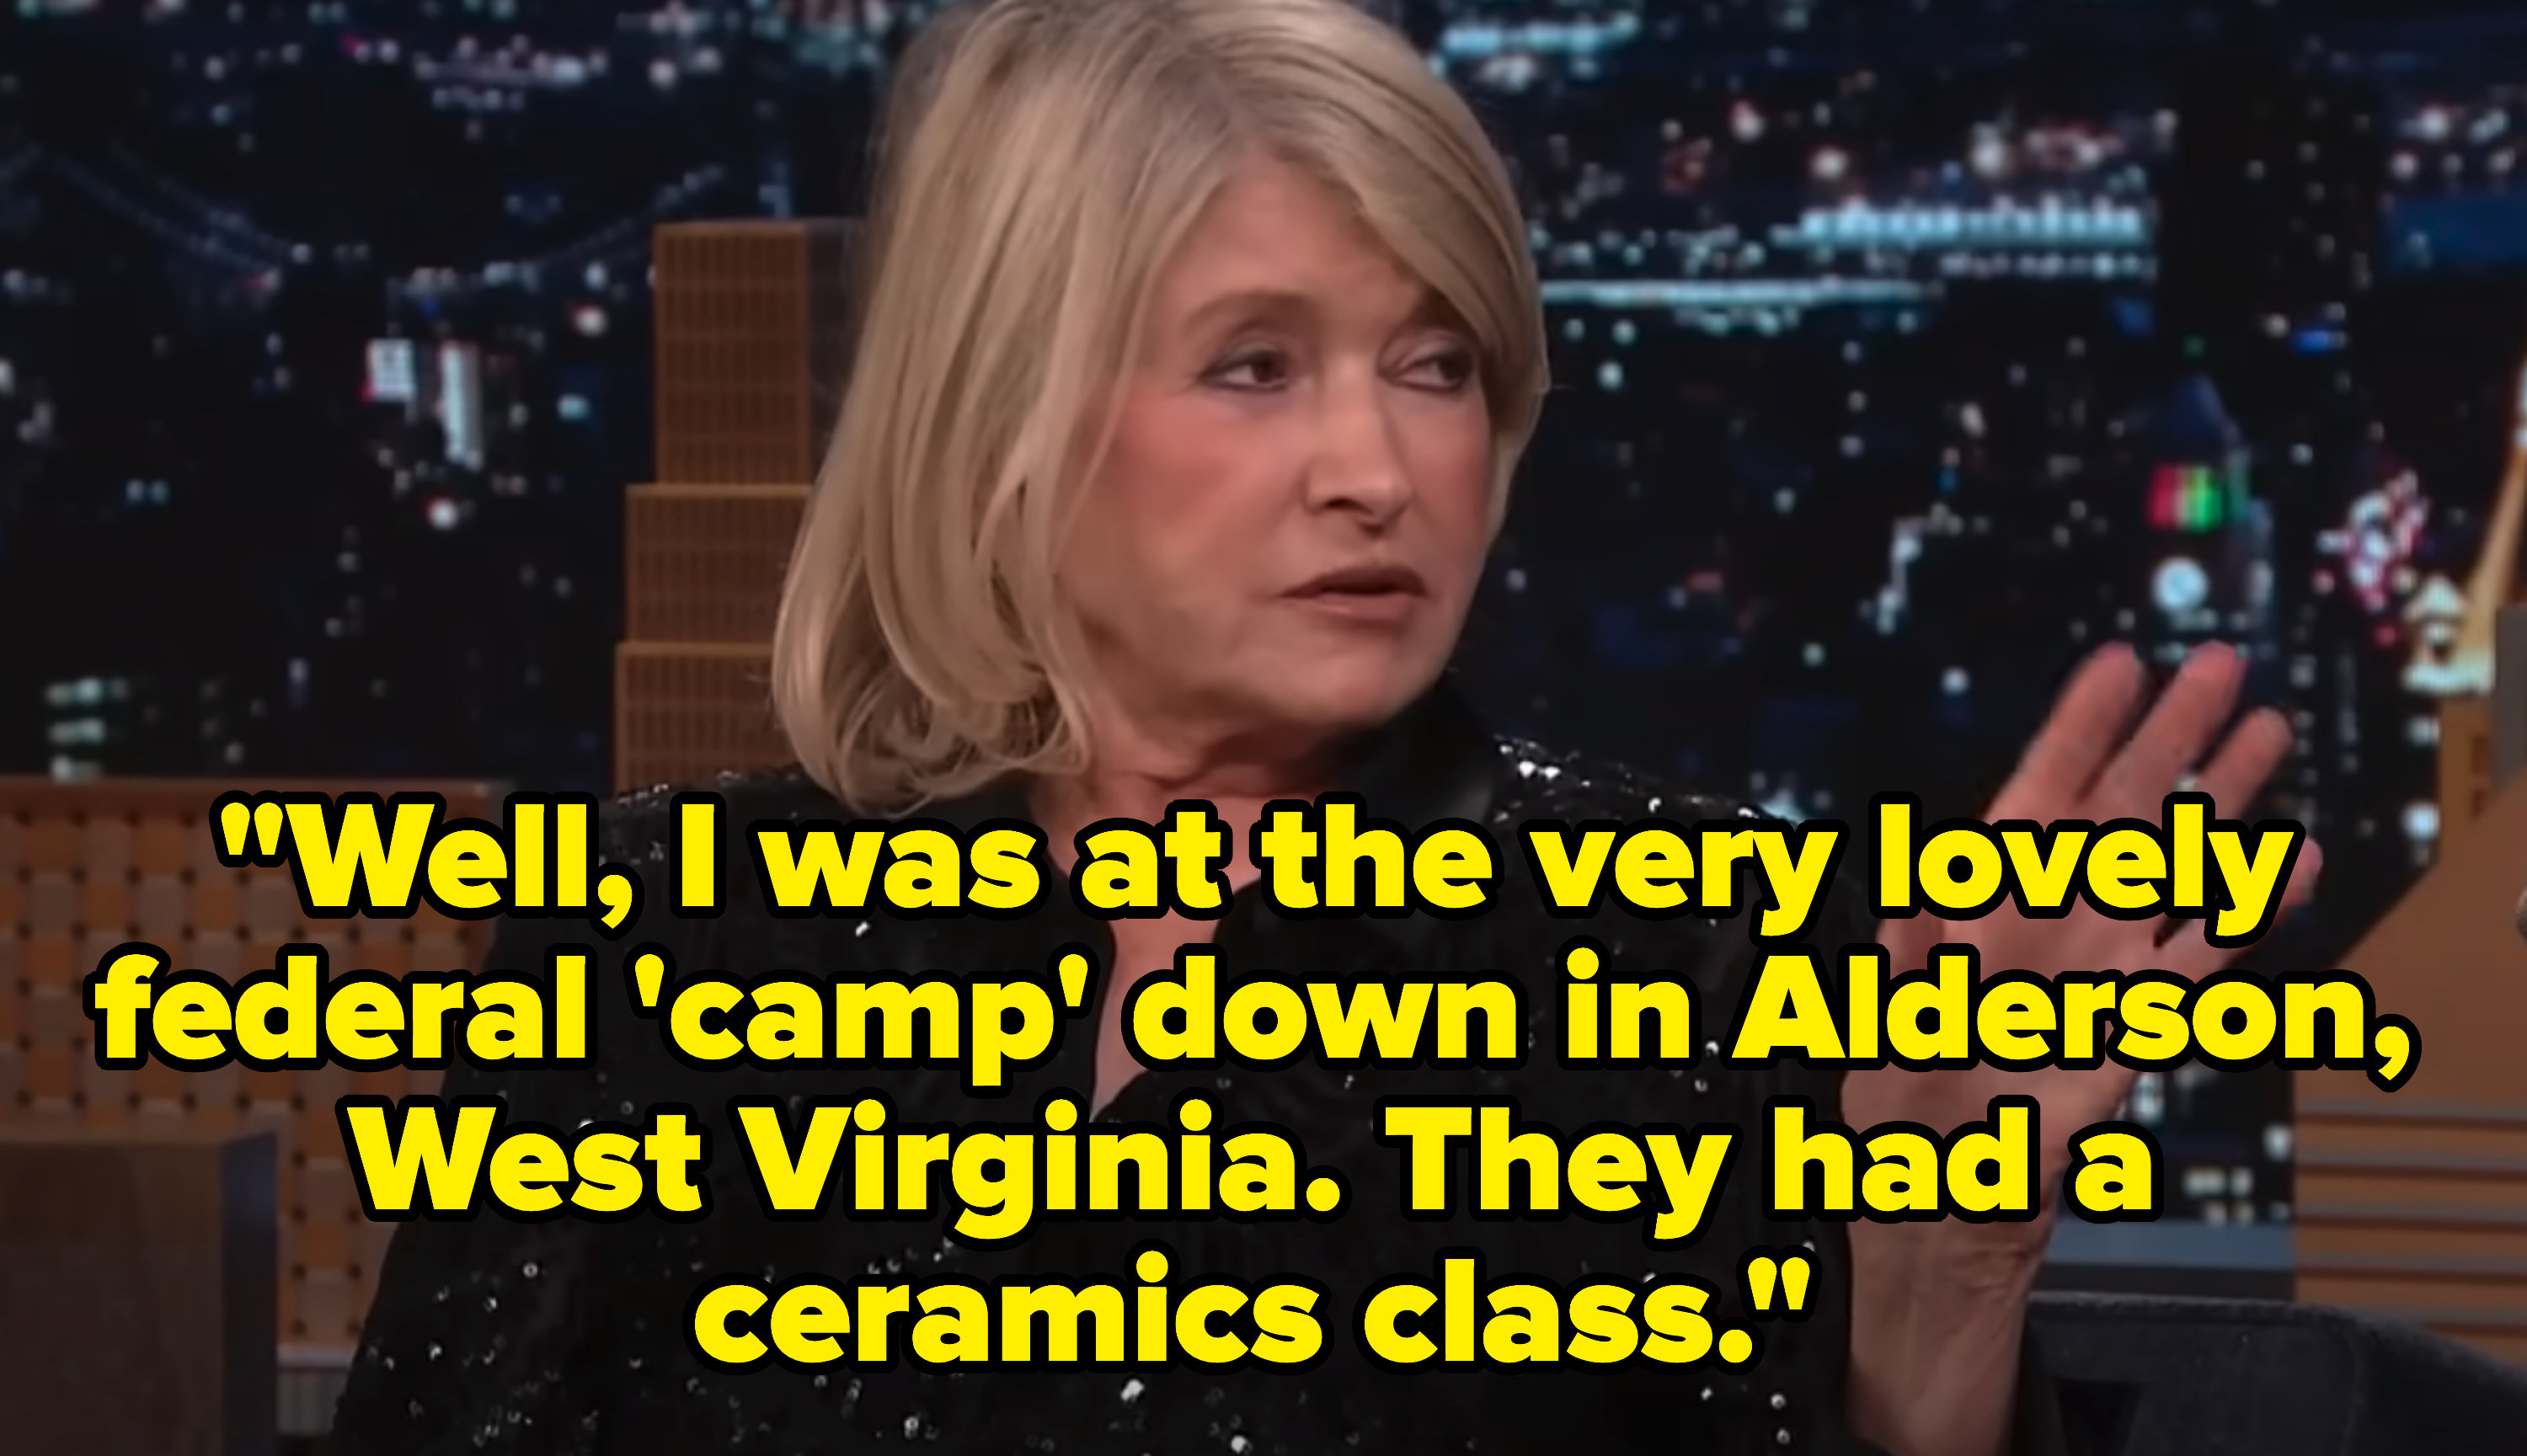 &quot;Well, I was at the very lovely federal &#x27;camp&#x27; down in Alderson, West Virginia. They had a ceramics class.&quot;